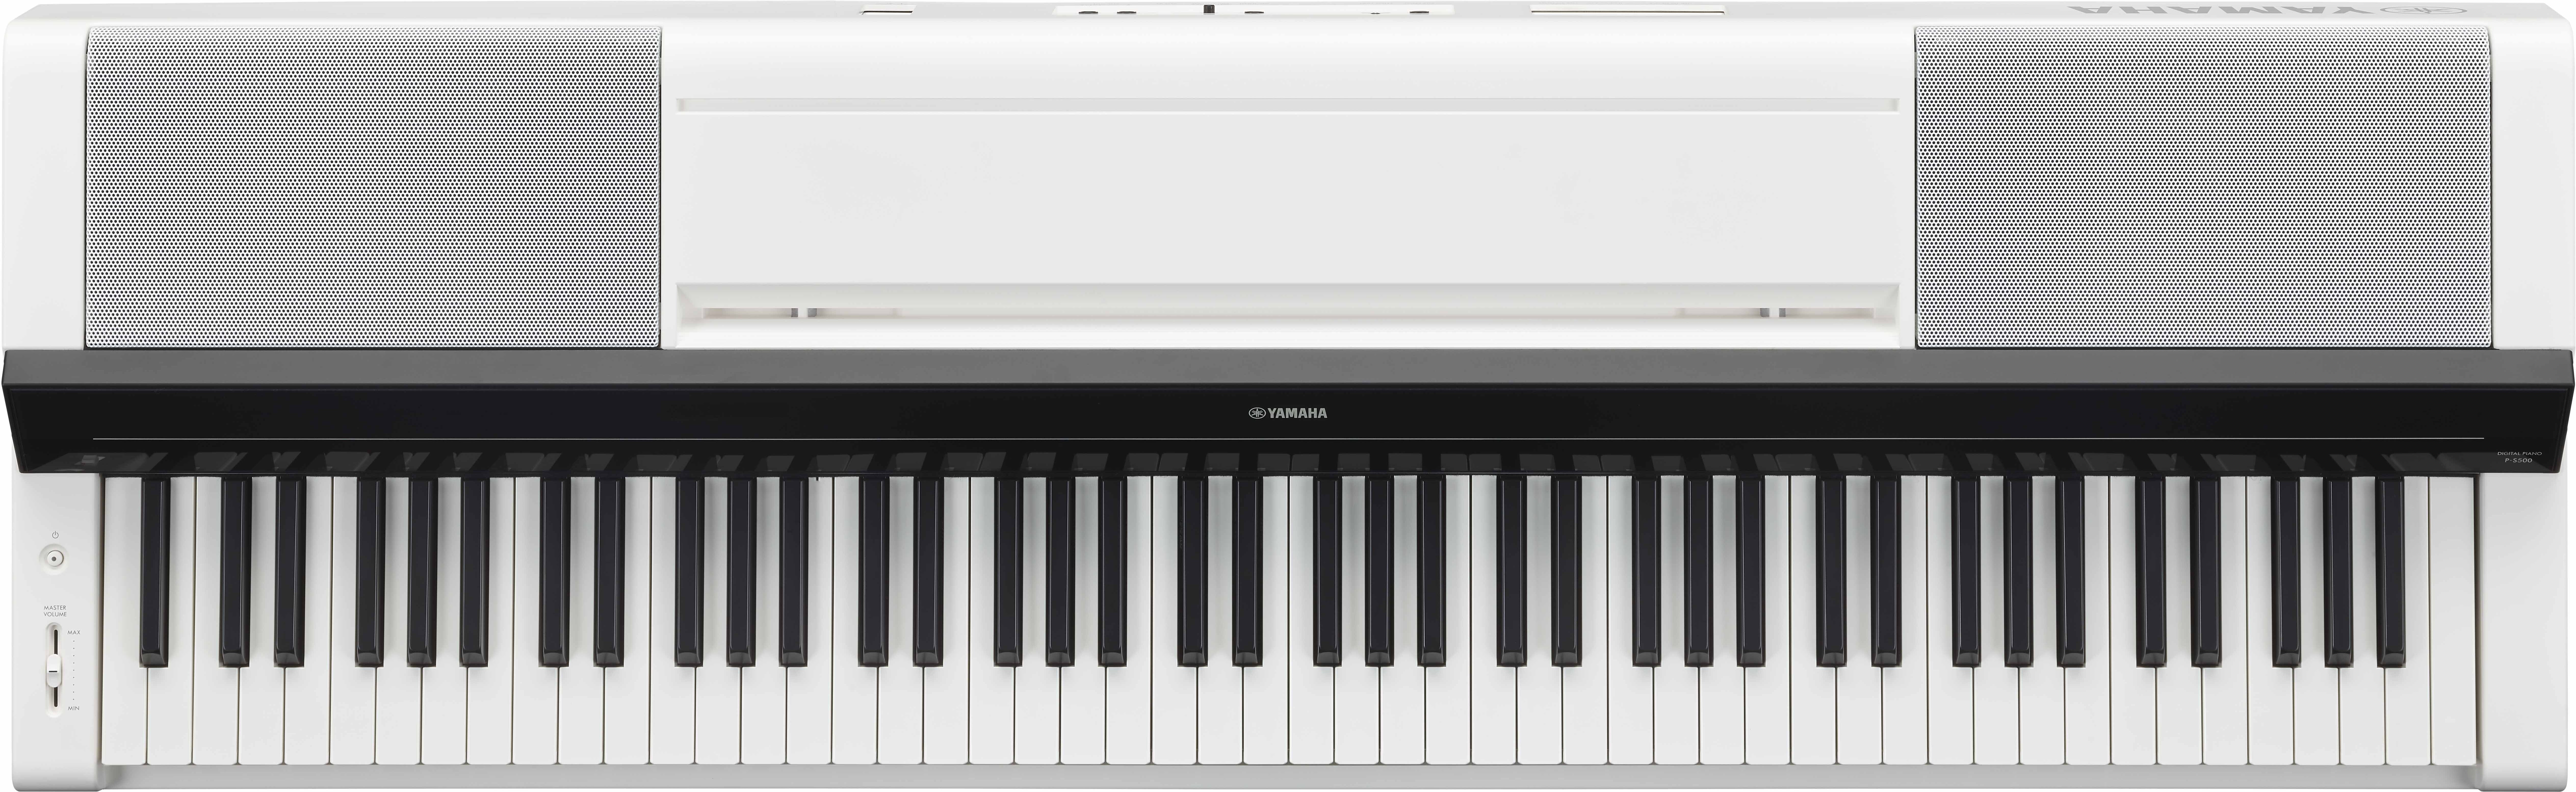 Yamaha PS500 88 Key Digital Piano in White -  PS500WH